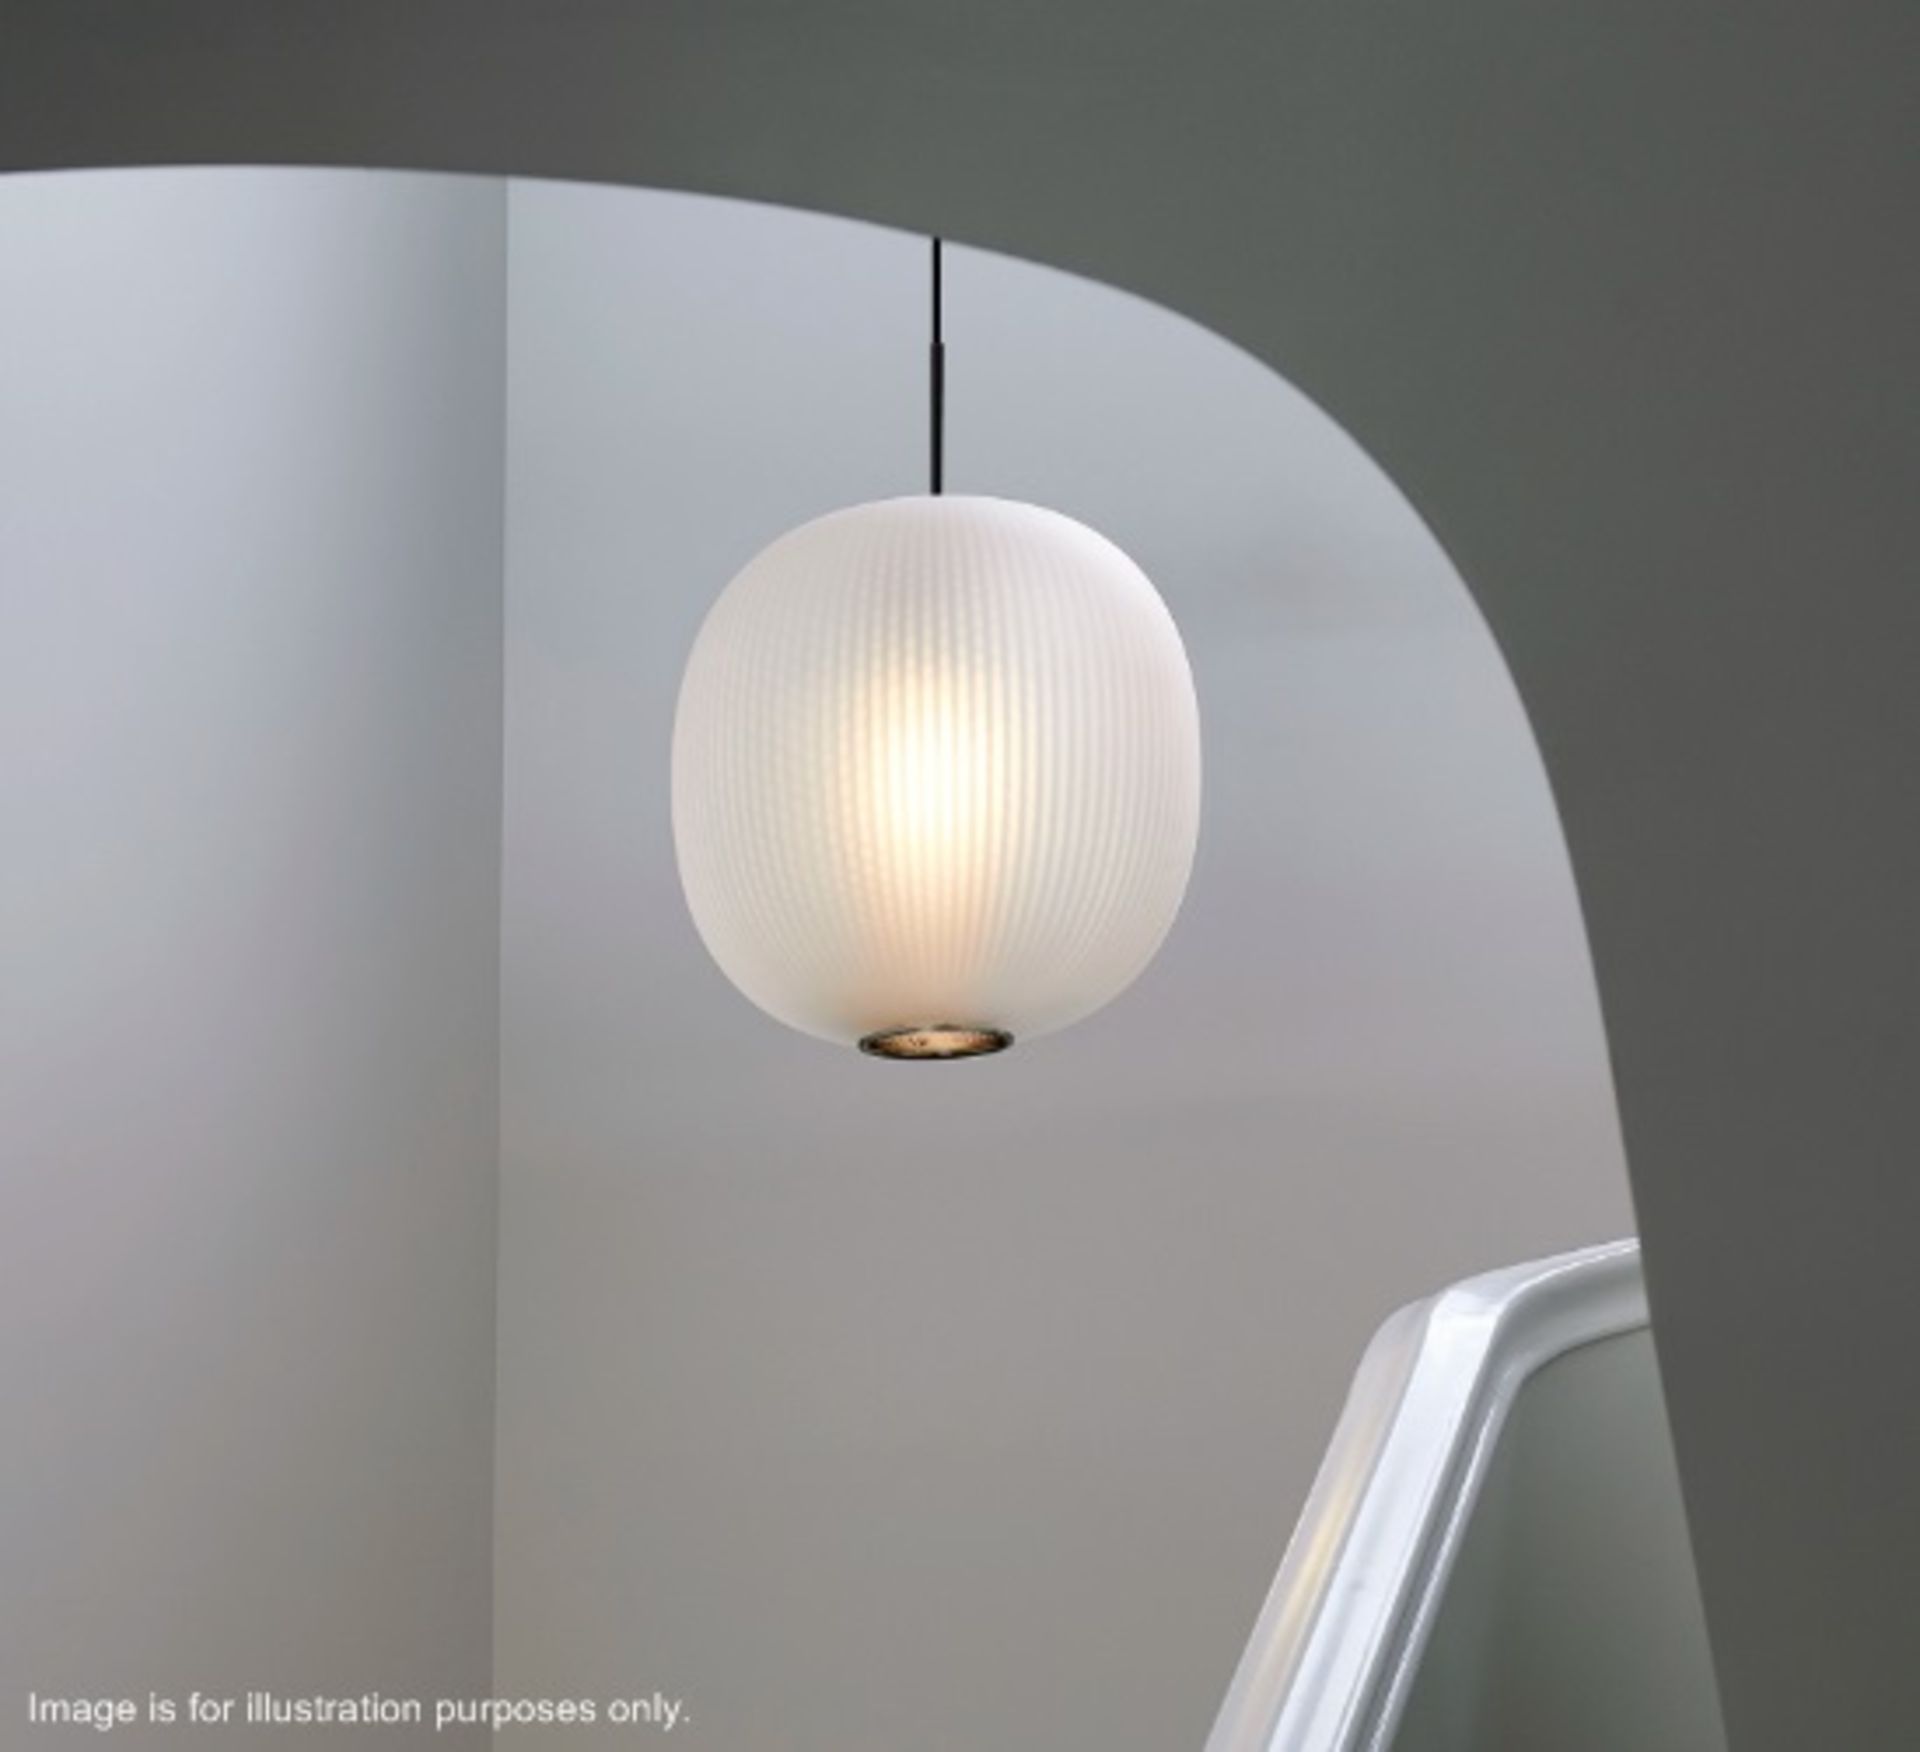 1 x 'Bloom' Pendant Light By Resident - Frosted White Glass - Original RRP £395.00 - Image 3 of 6